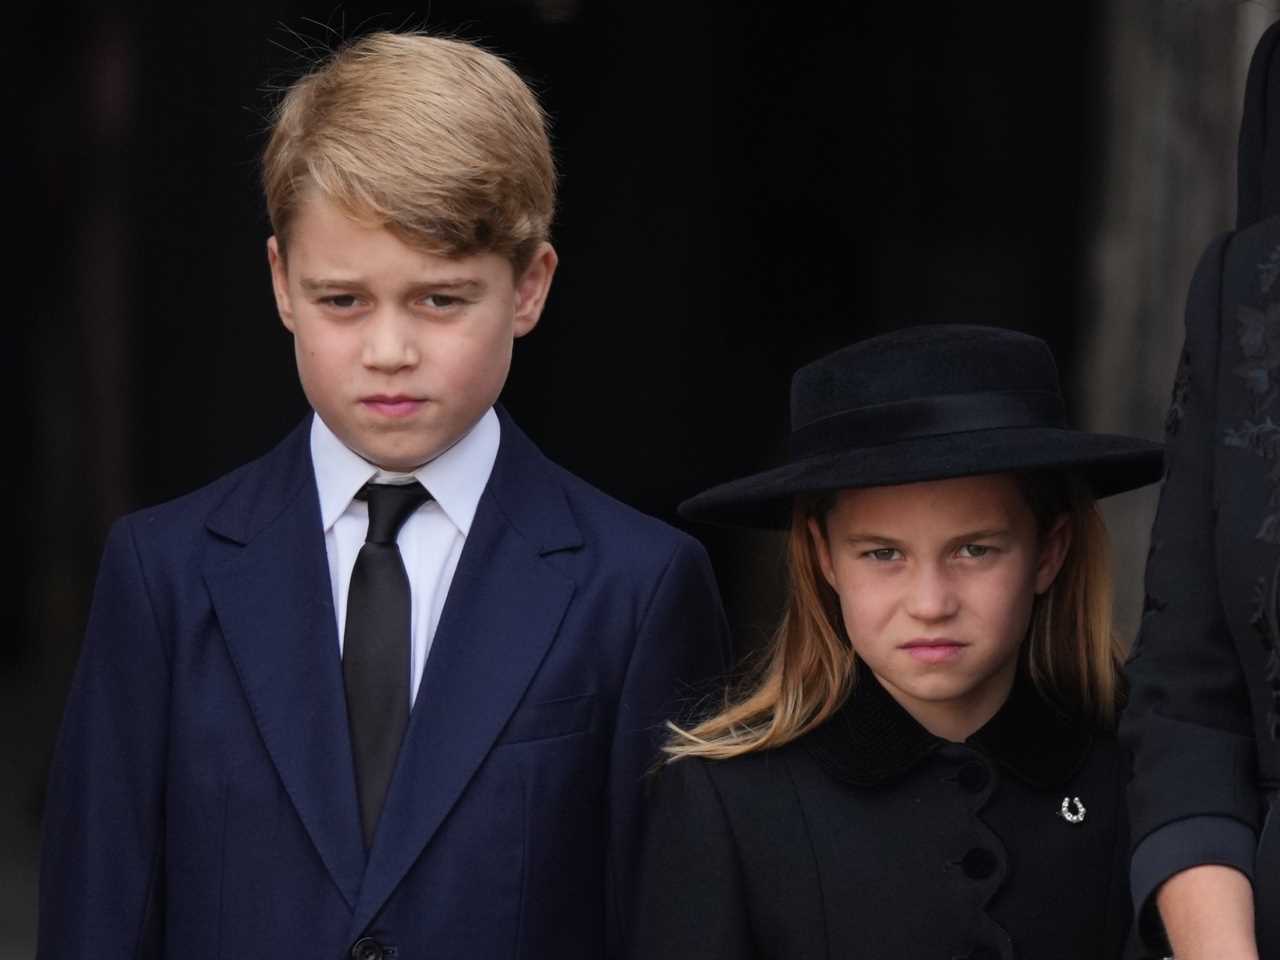 Brave Prince George showed he has what it takes to be king after being thrust into spotlight at his Gan-Gan’s funeral